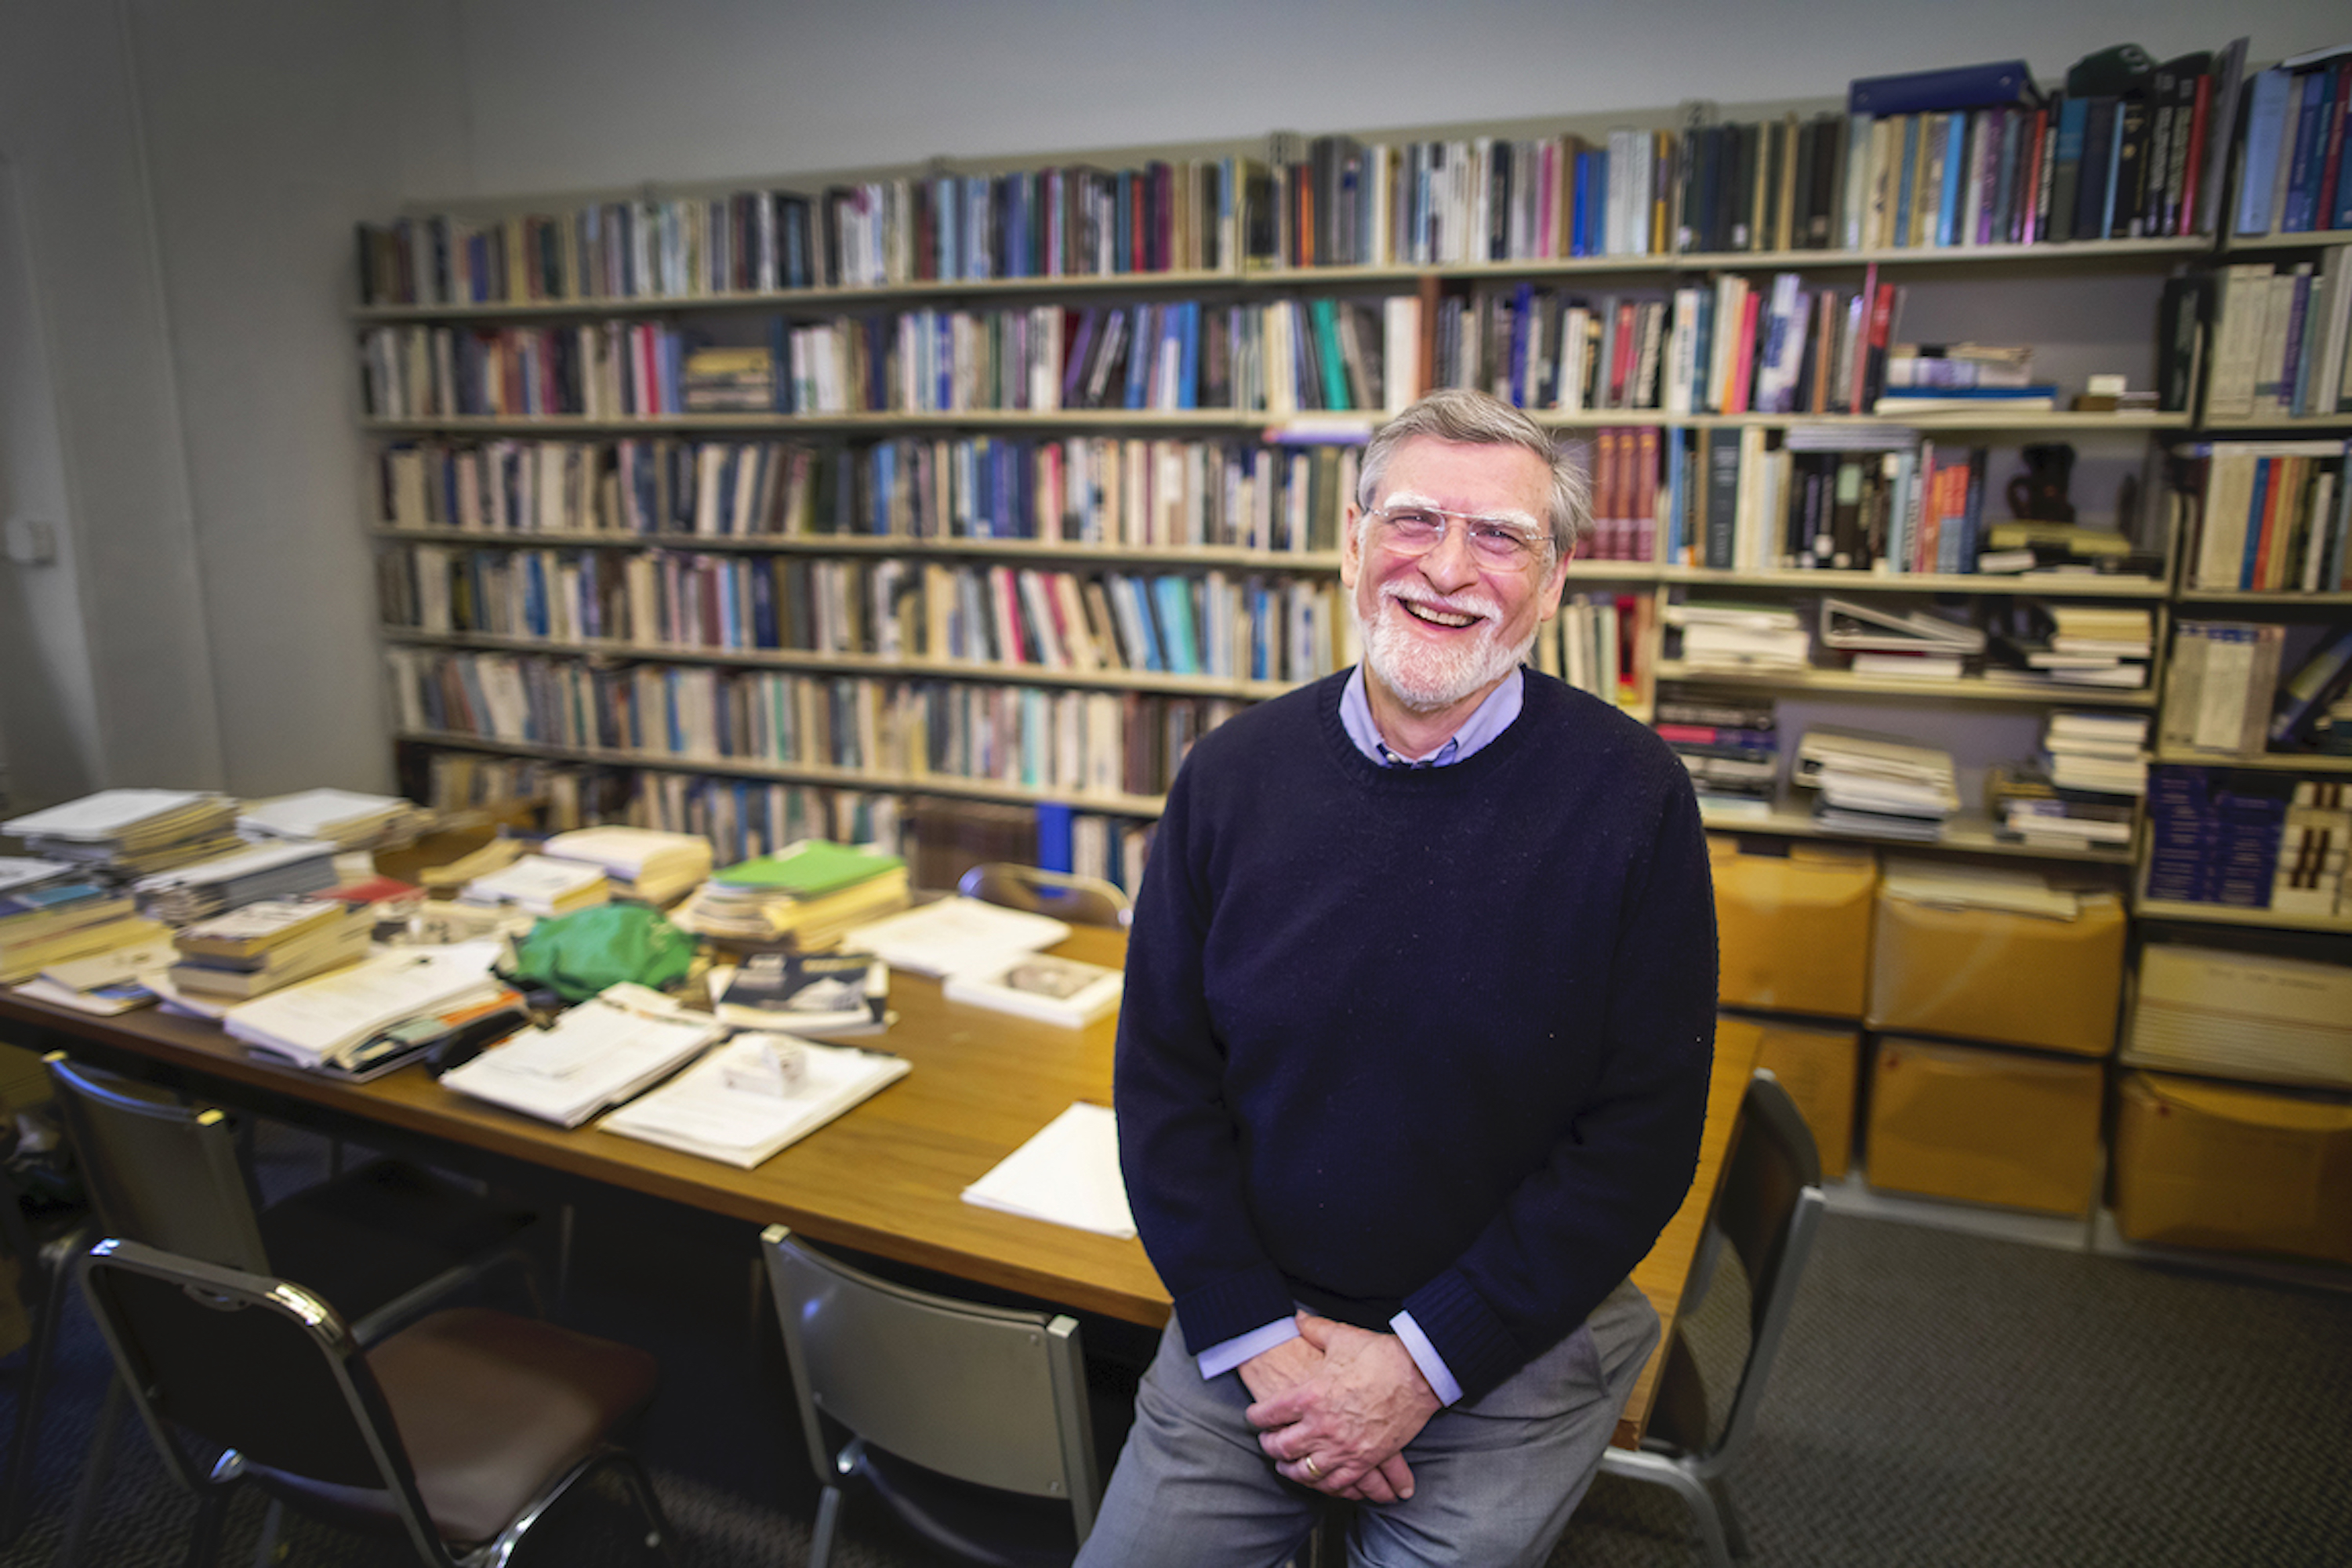 Person sits on corner of conference table with wall of books behind them, smiling at the camera.